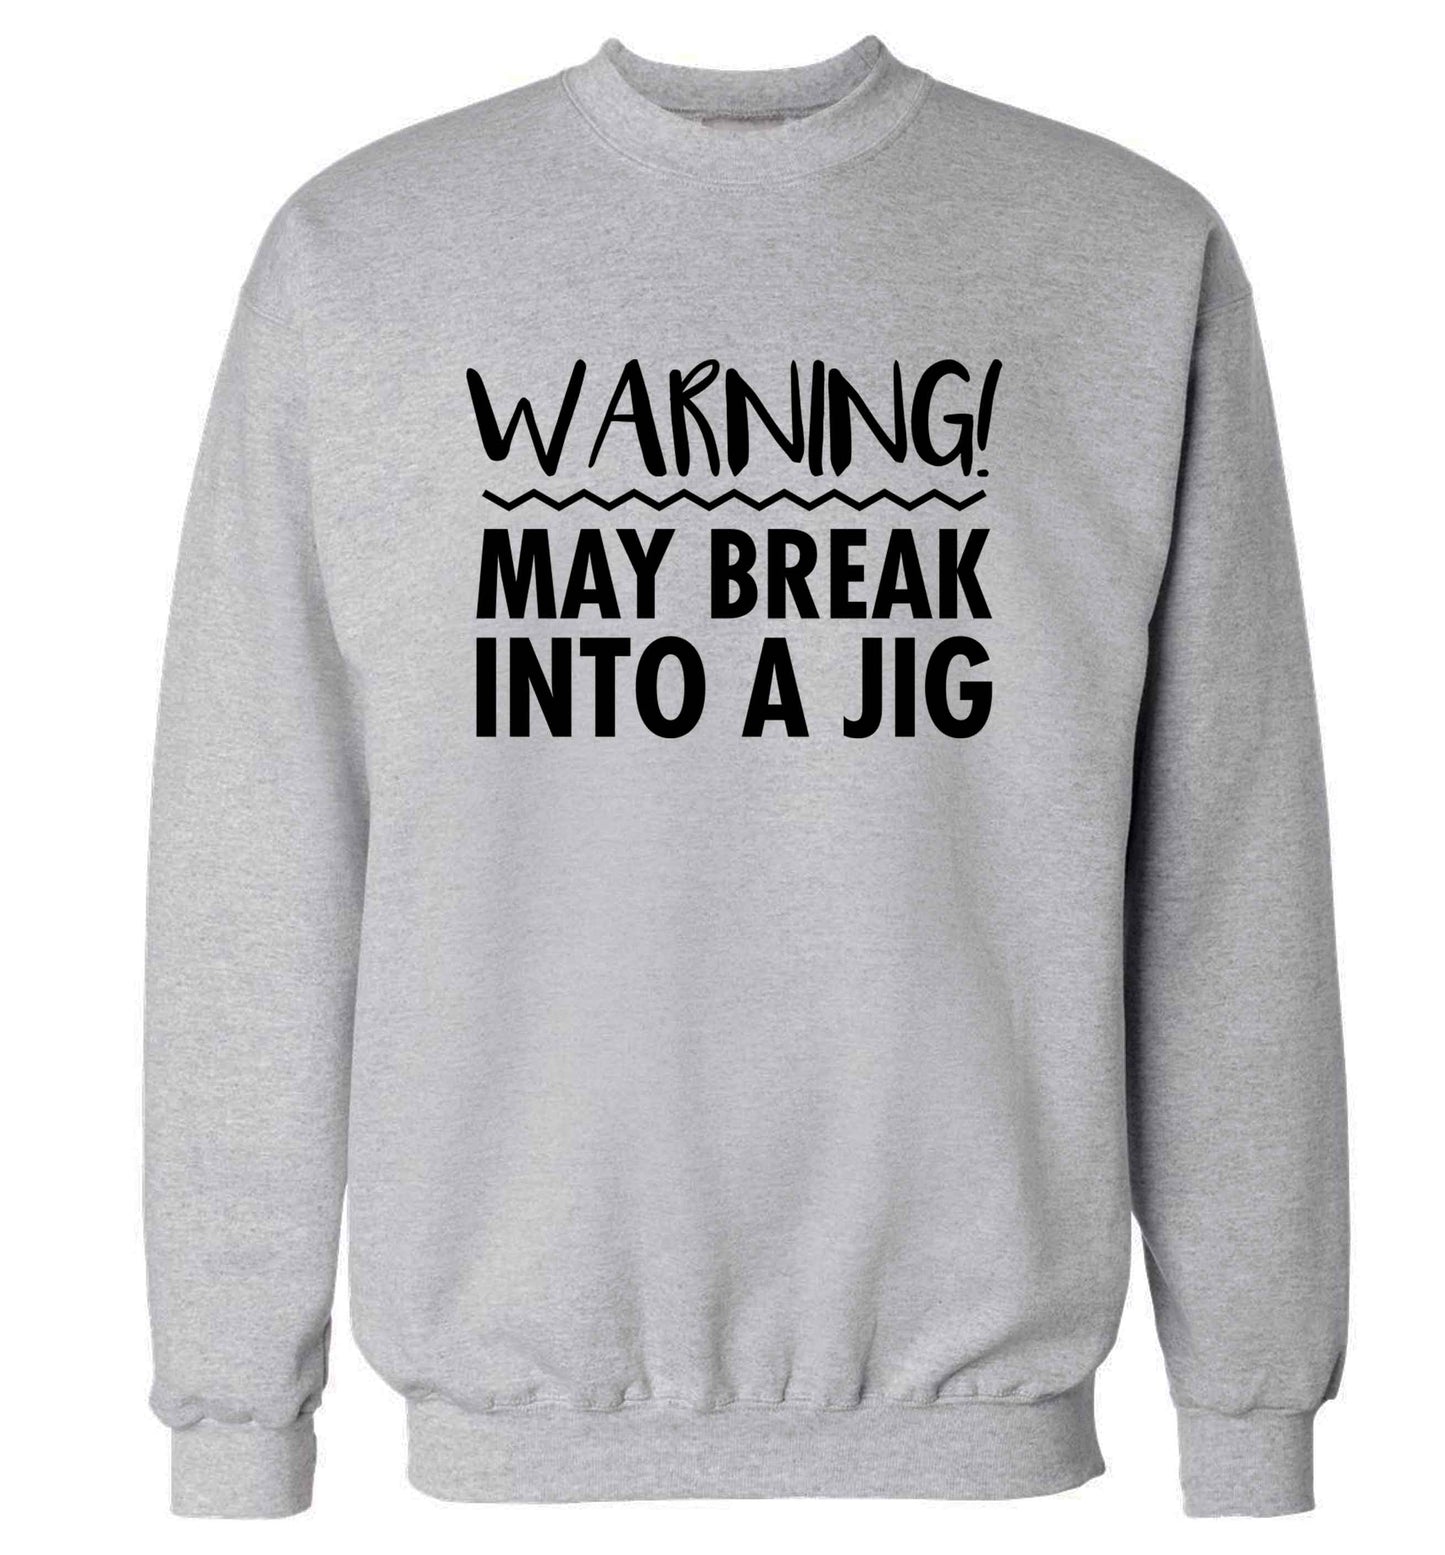 Warning may break into a jig adult's unisex grey sweater 2XL